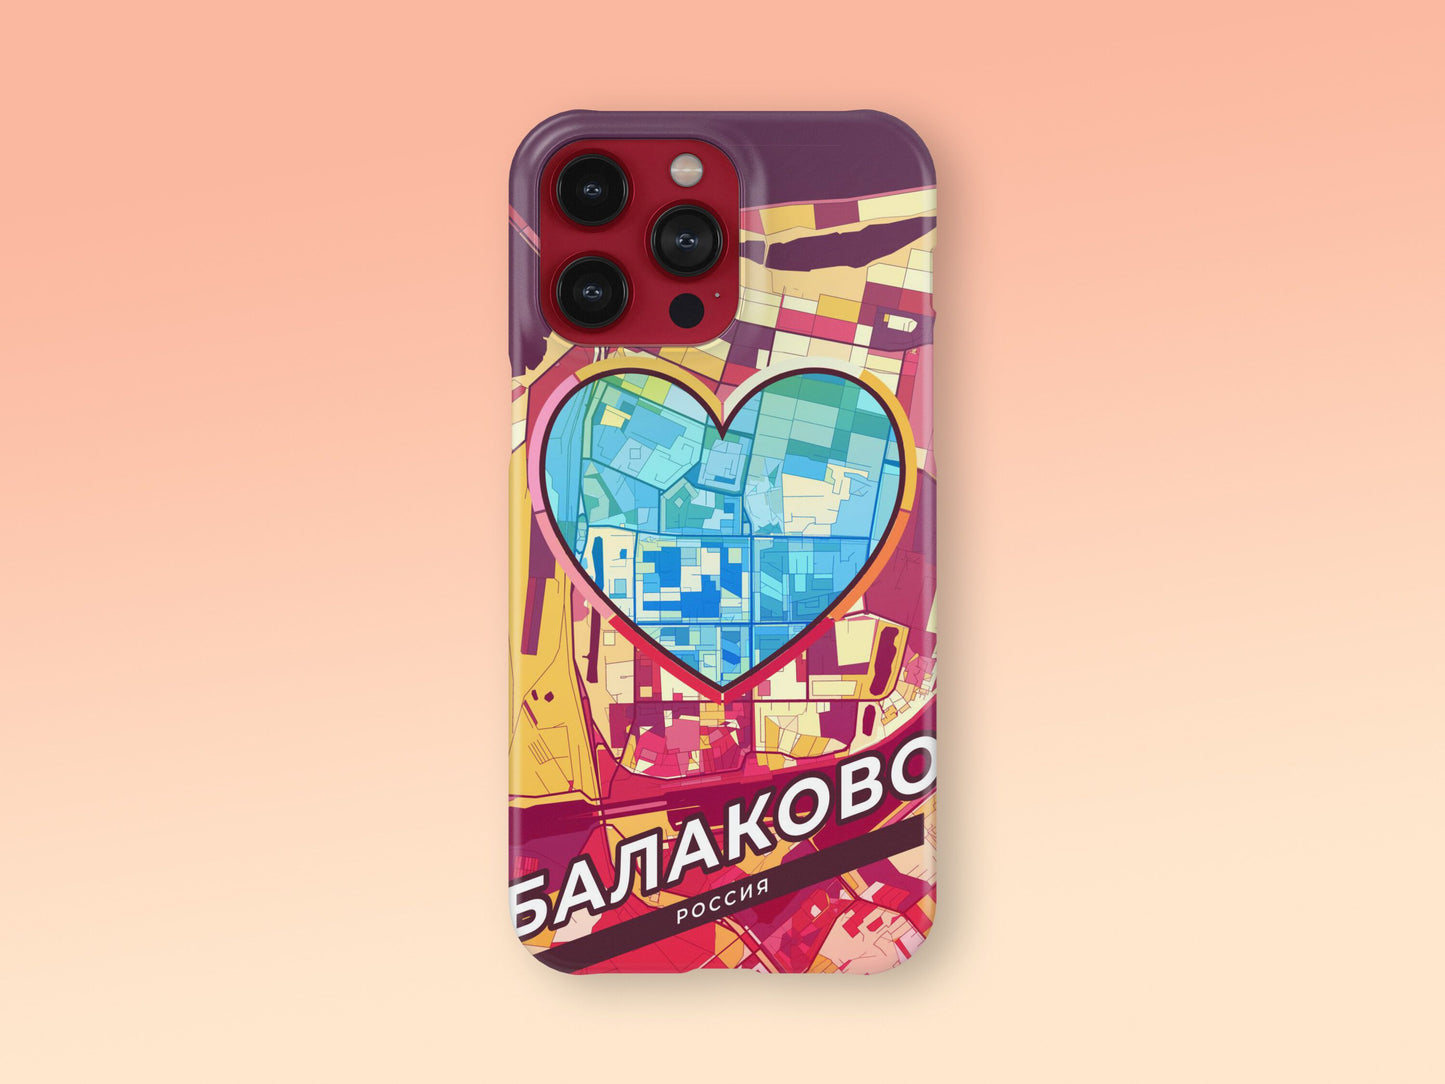 Balakovo Russia slim phone case with colorful icon. Birthday, wedding or housewarming gift. Couple match cases. 2